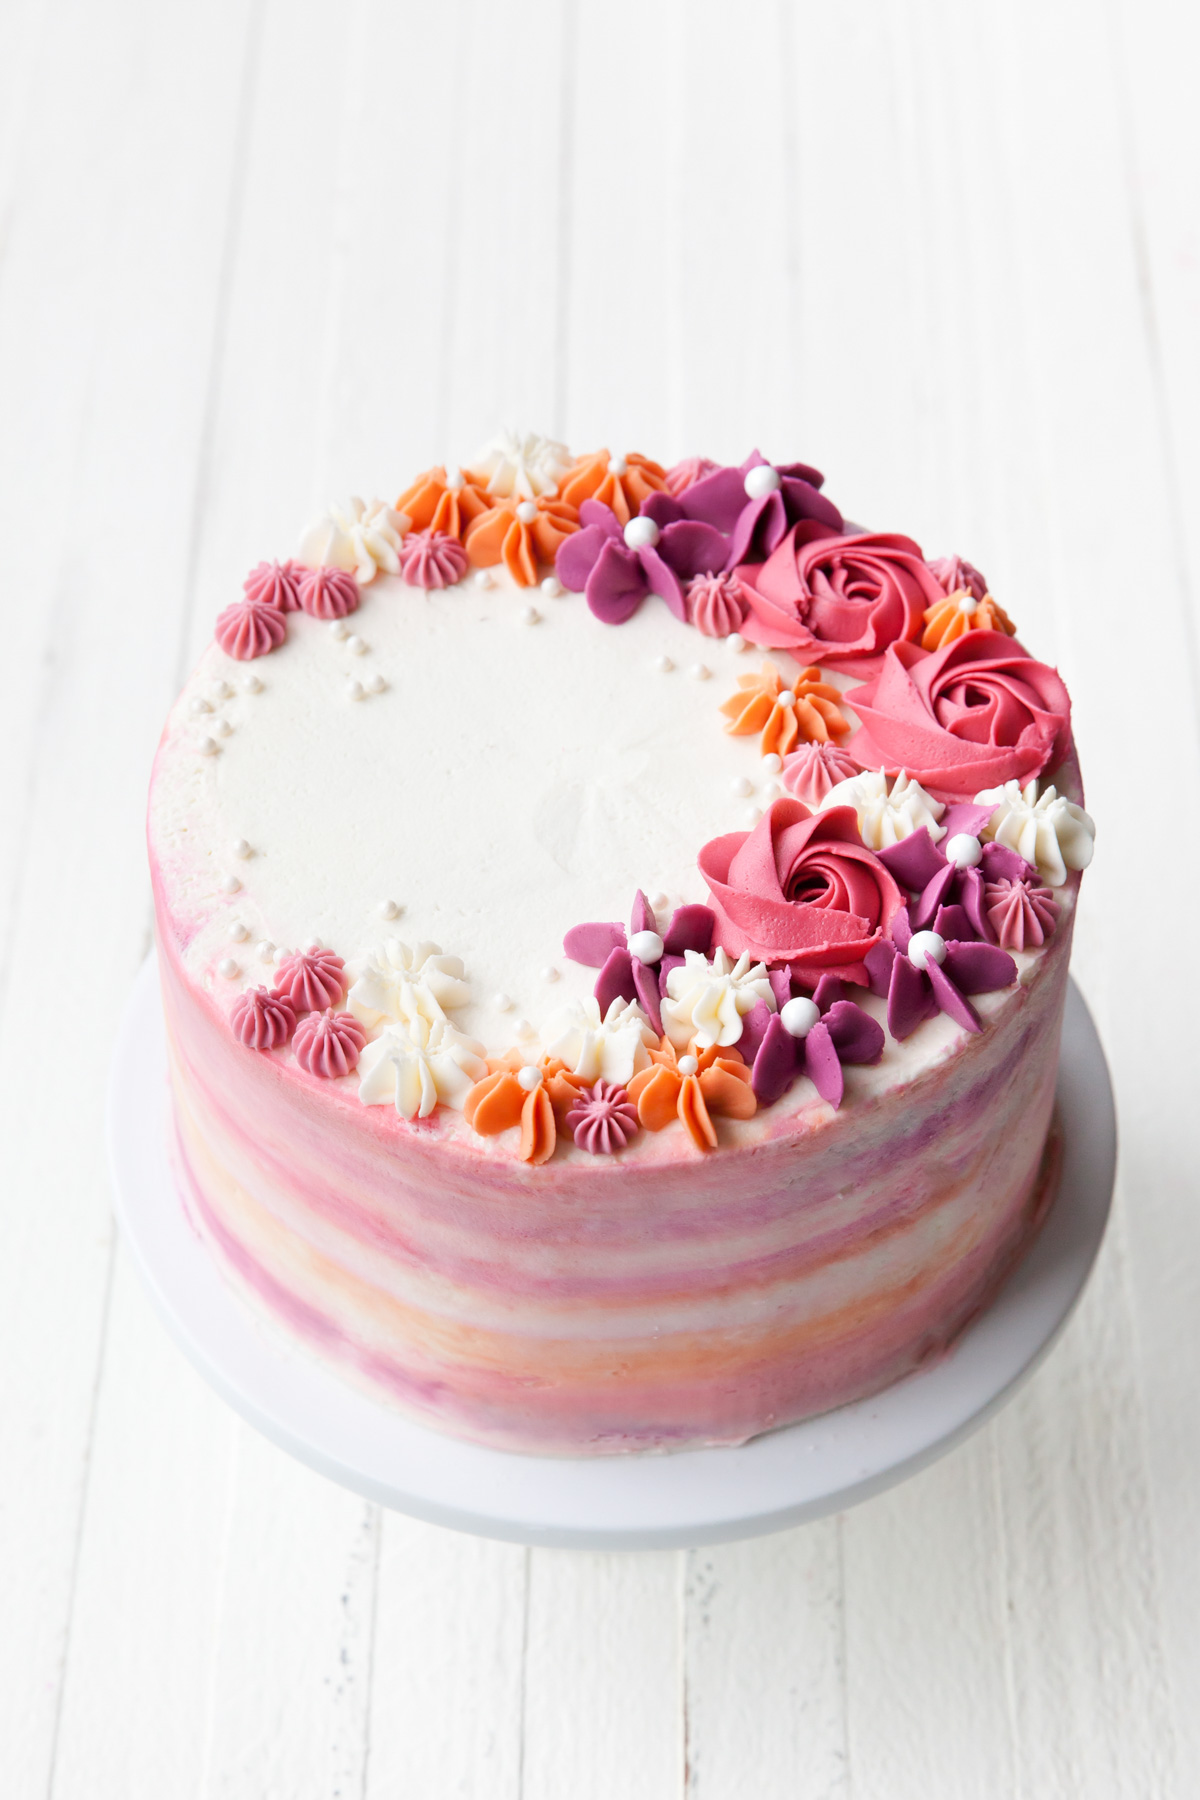 What to Know About Putting Flowers on Your Cakes | The Kitchn